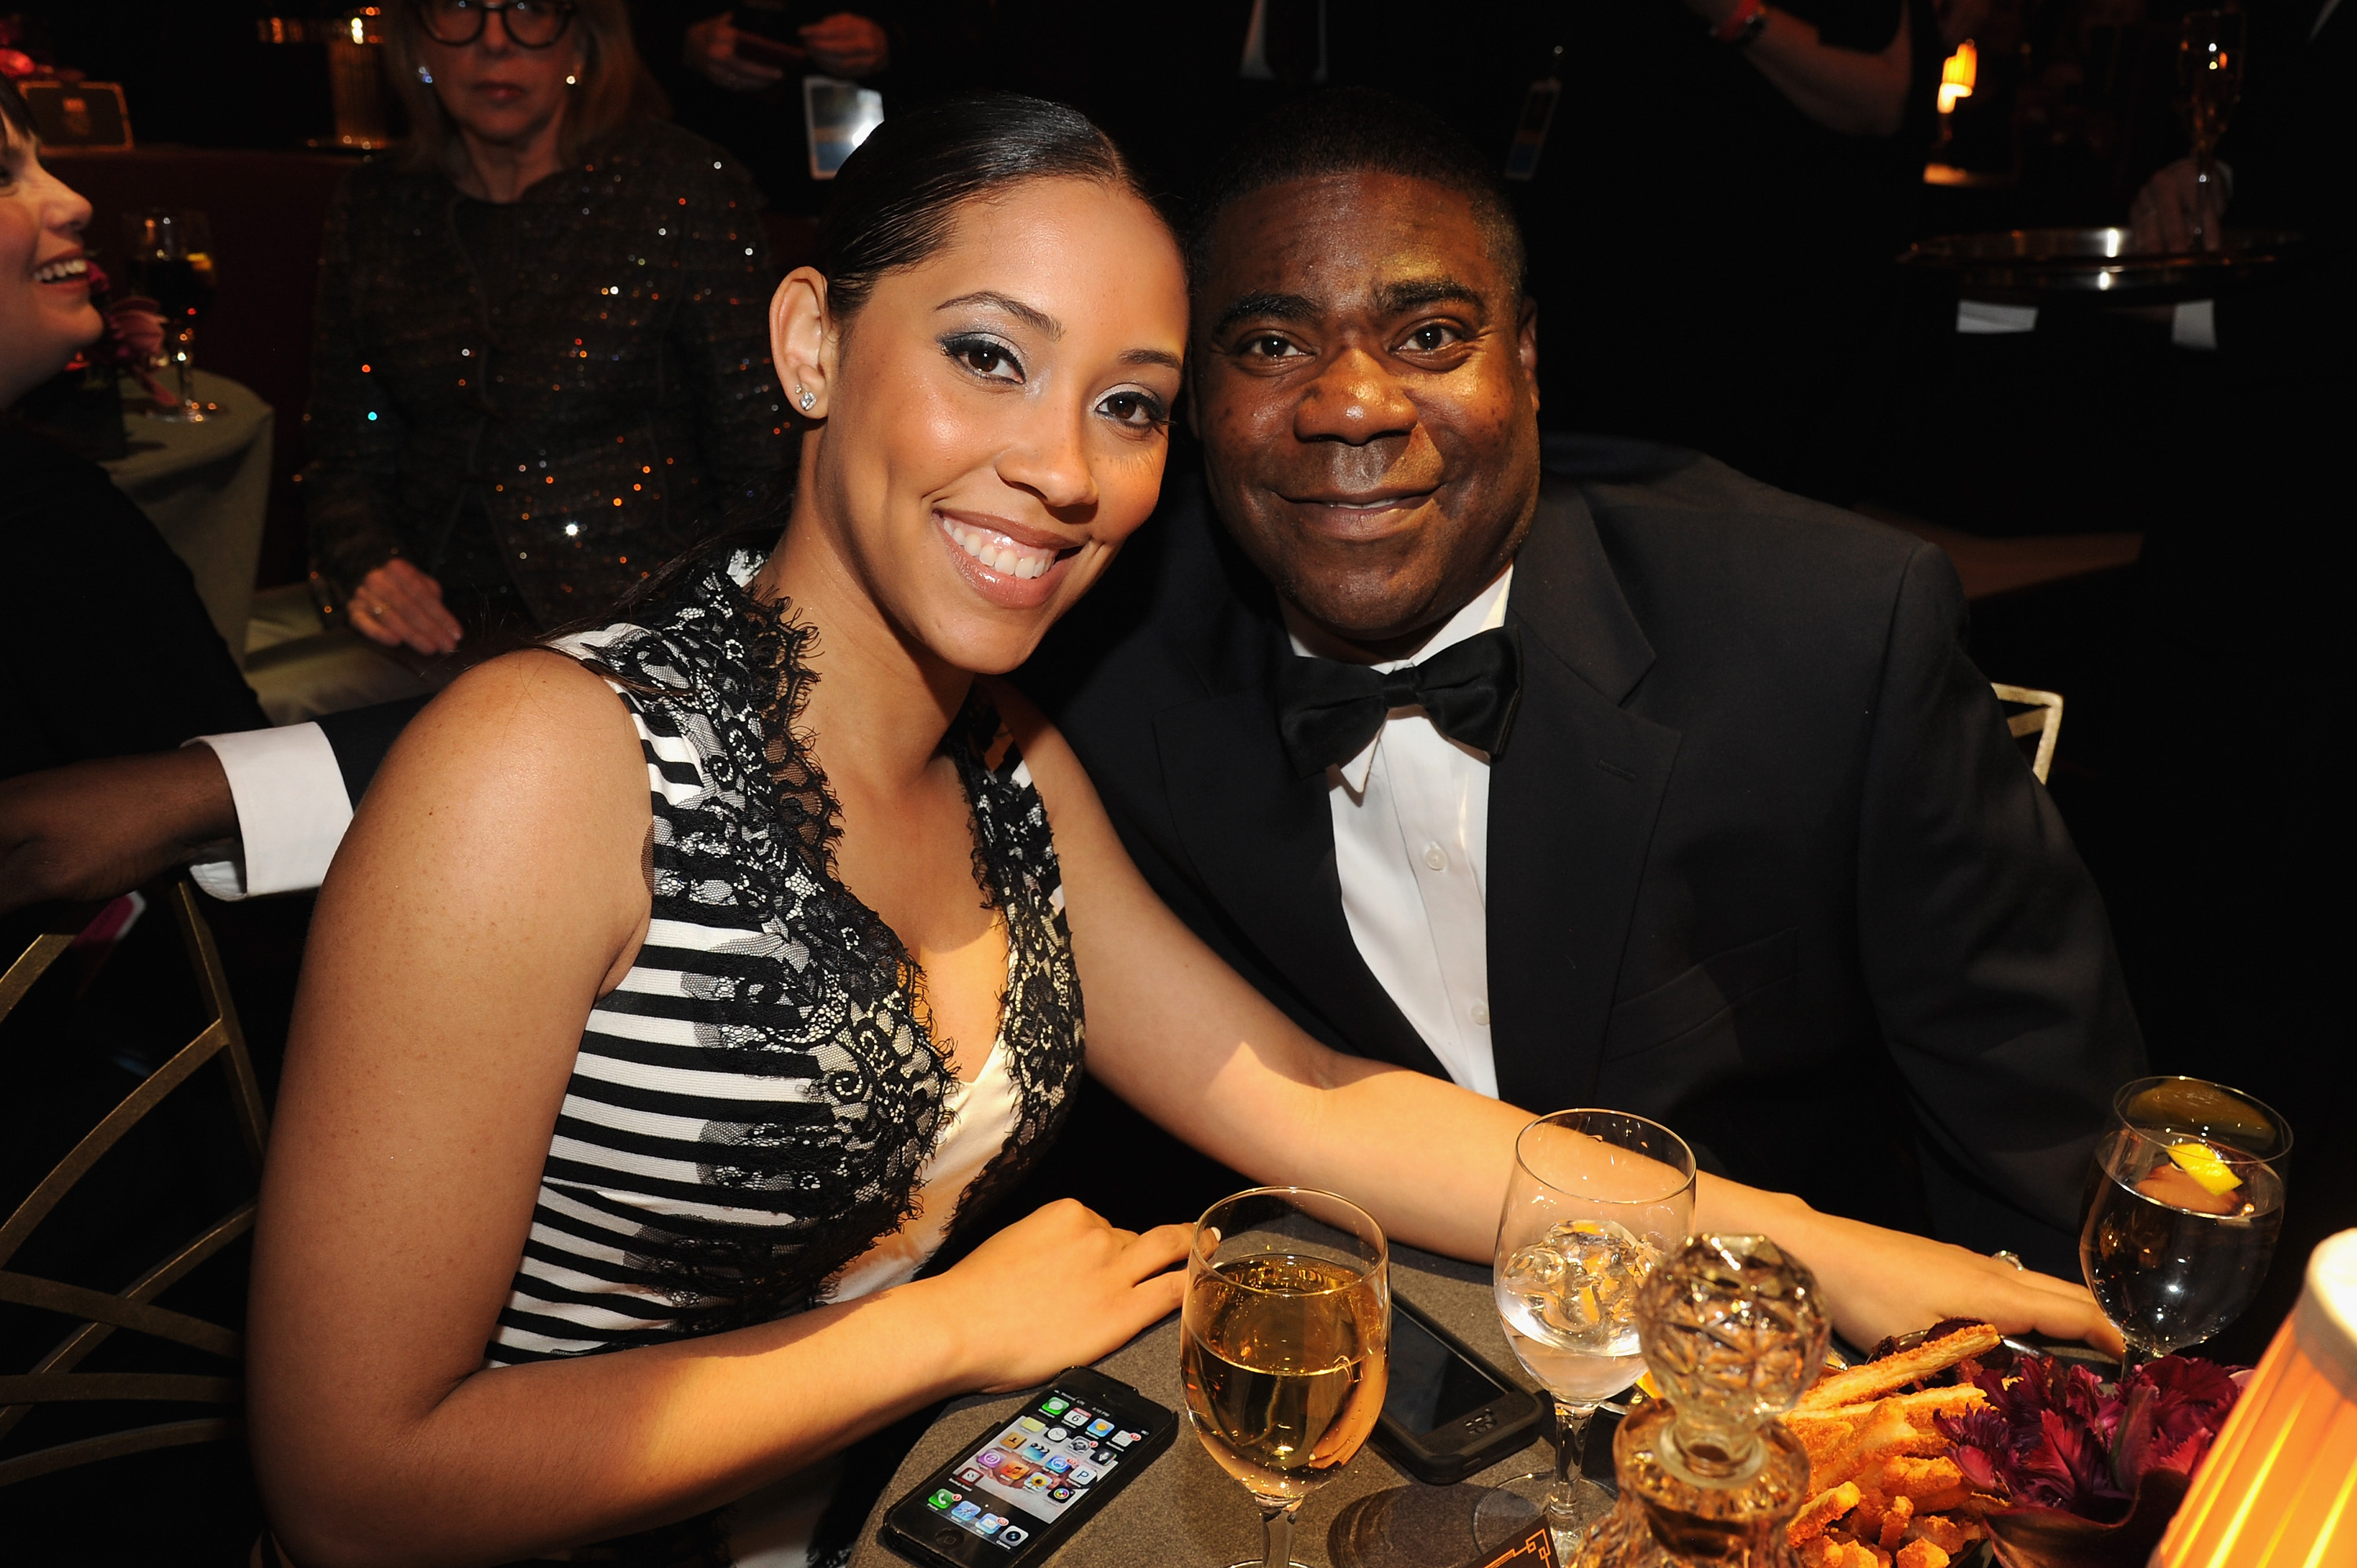 Meghan Wollover and Tracy Morgan attend Spike TV's "Don Rickles: One Night Only" on May 6, 2014 in New York City. (Kevin Mazur—Getty Images for Spike TV)